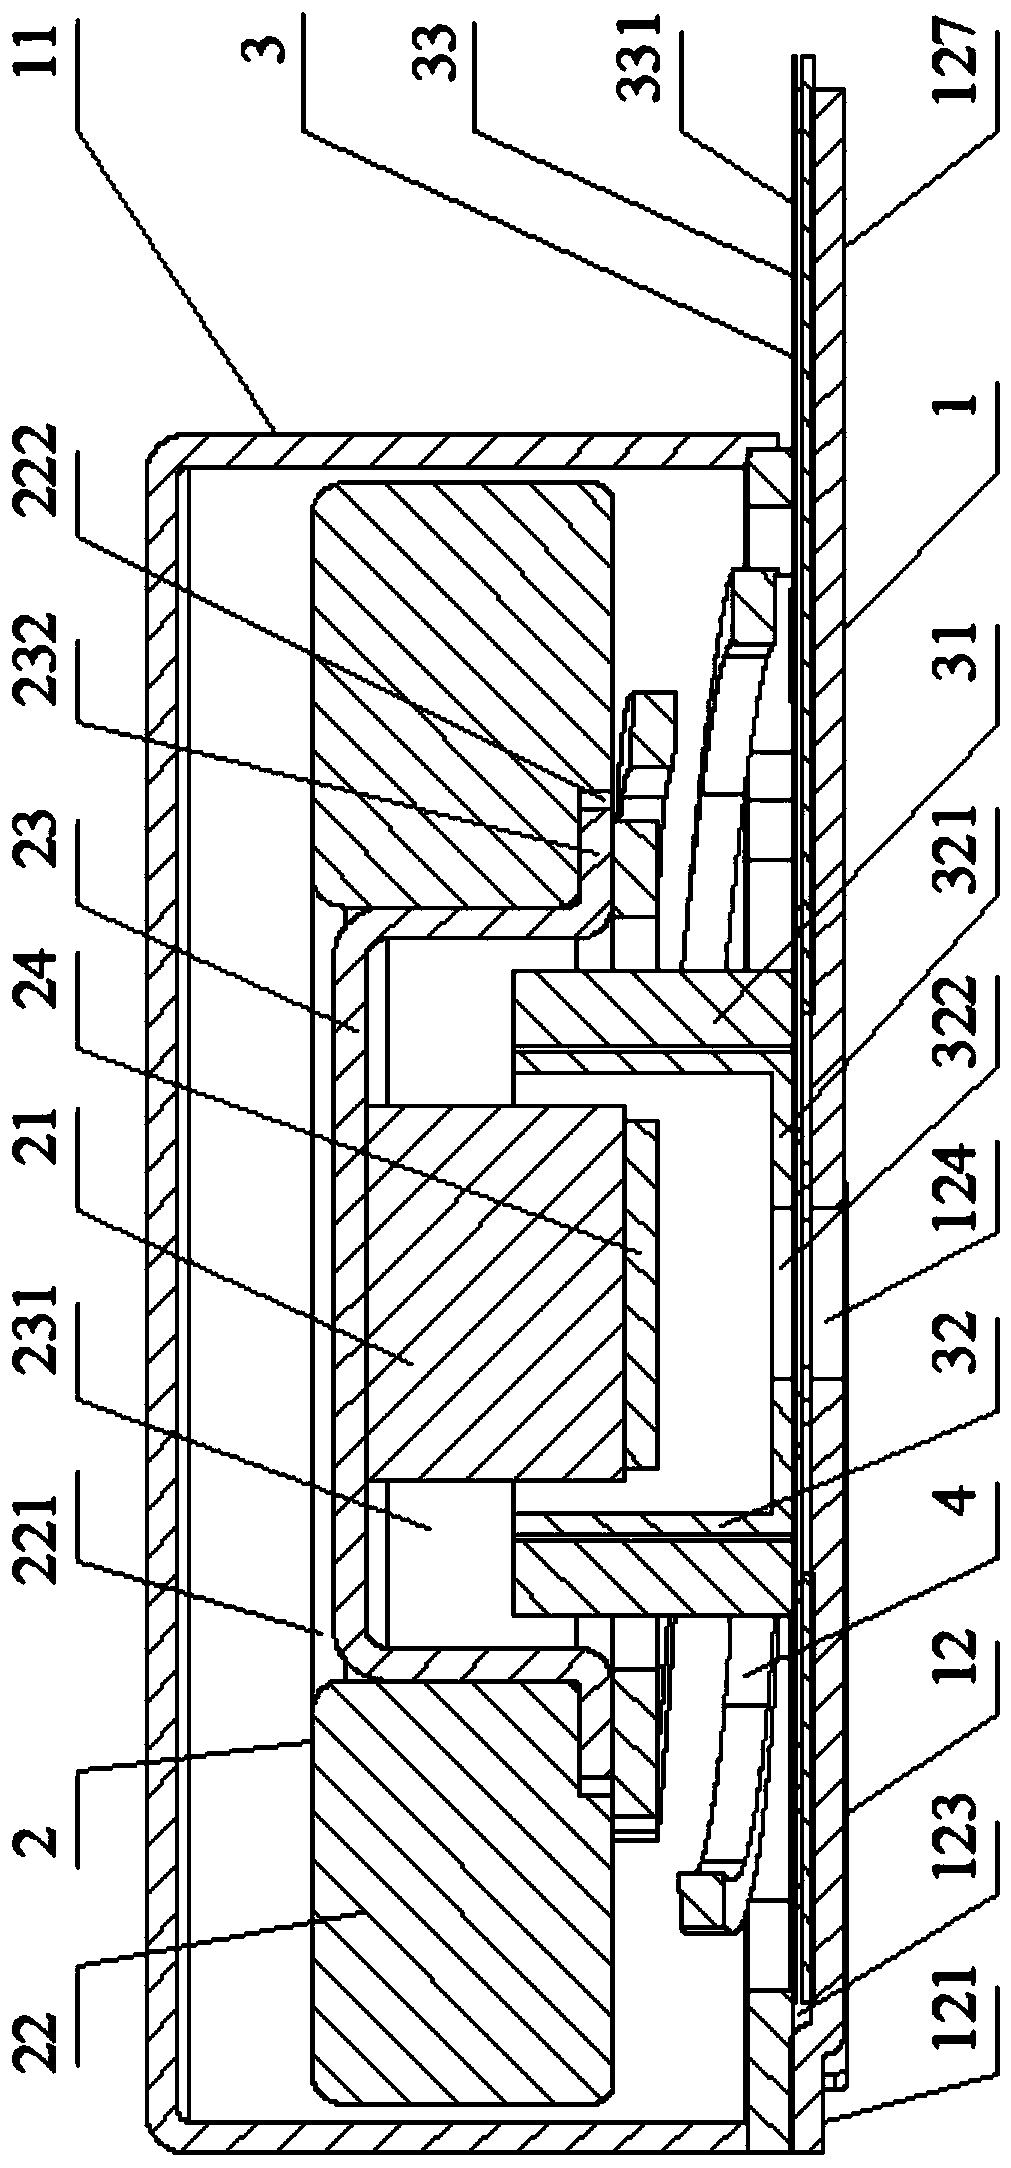 Vertical linear motor with iron core embedded in coil